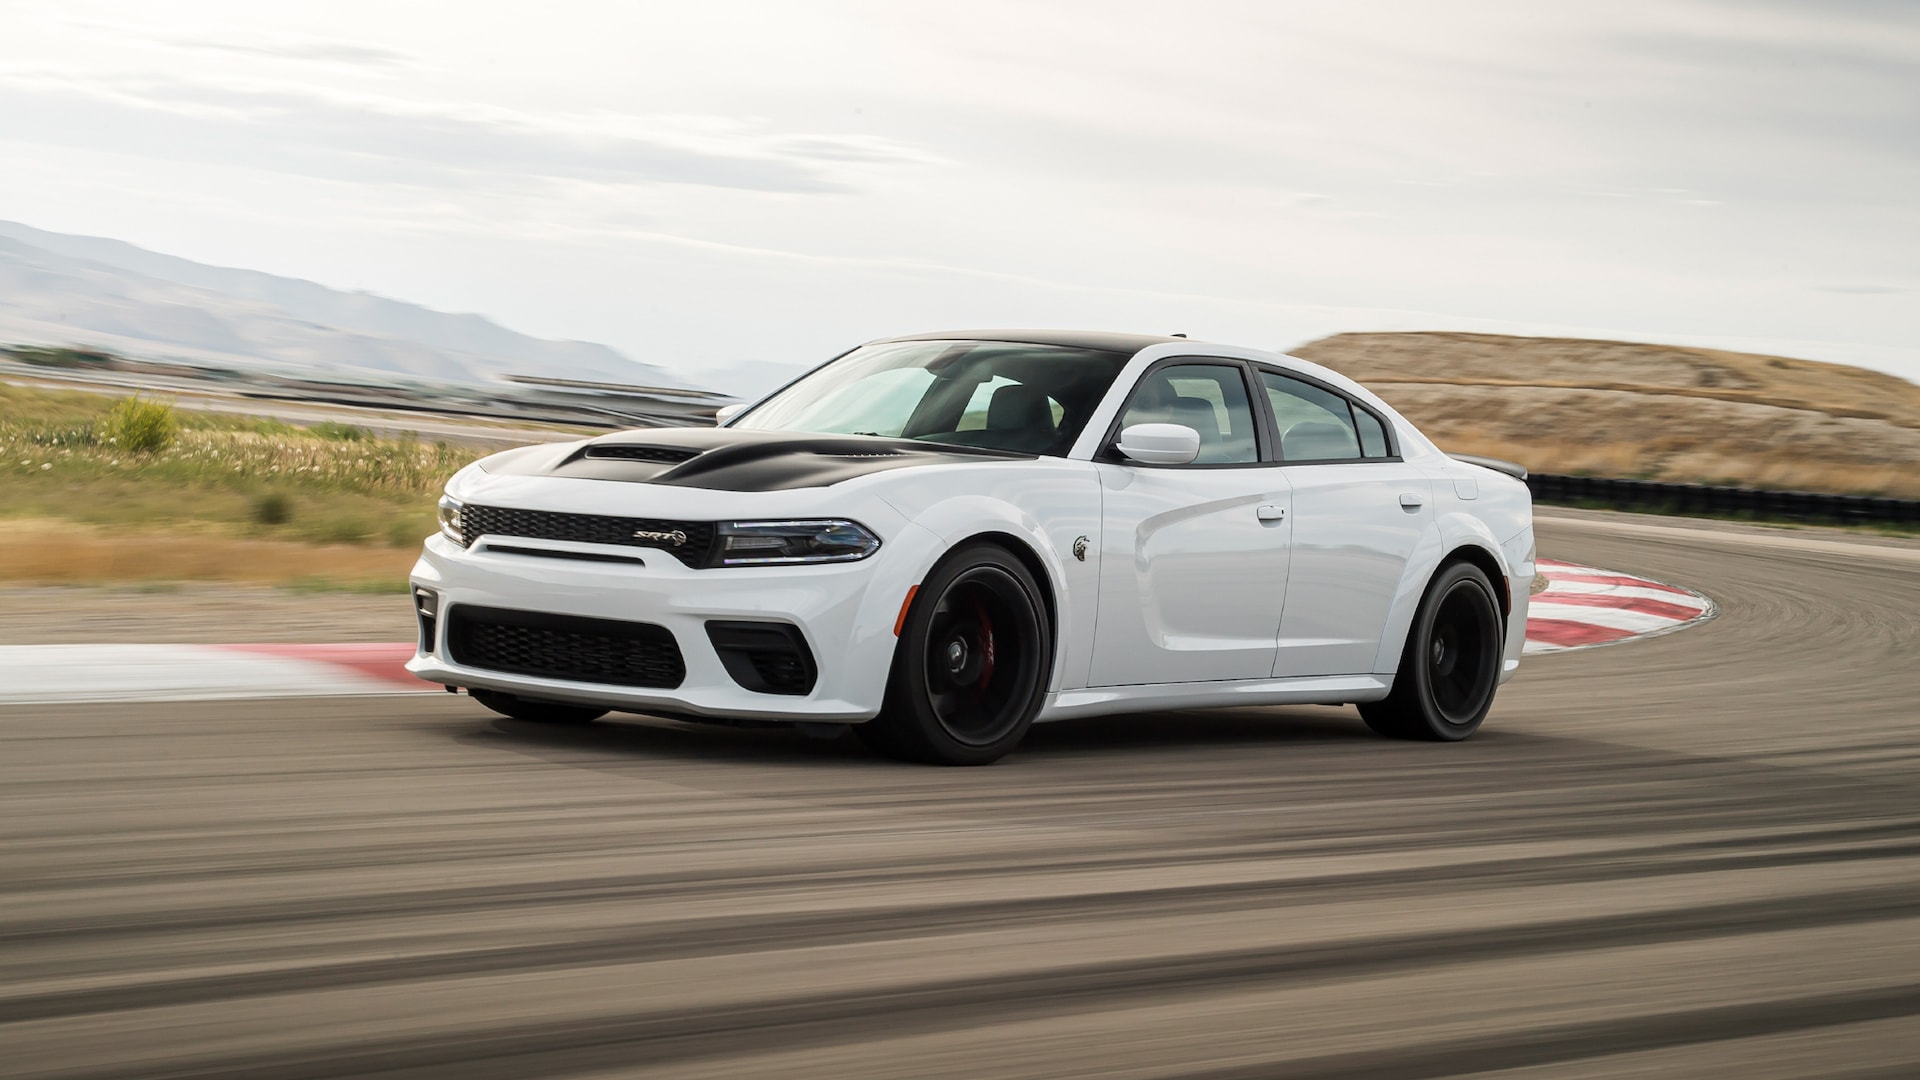 2021 Dodge Charger Hellcat Redeye front three quarter